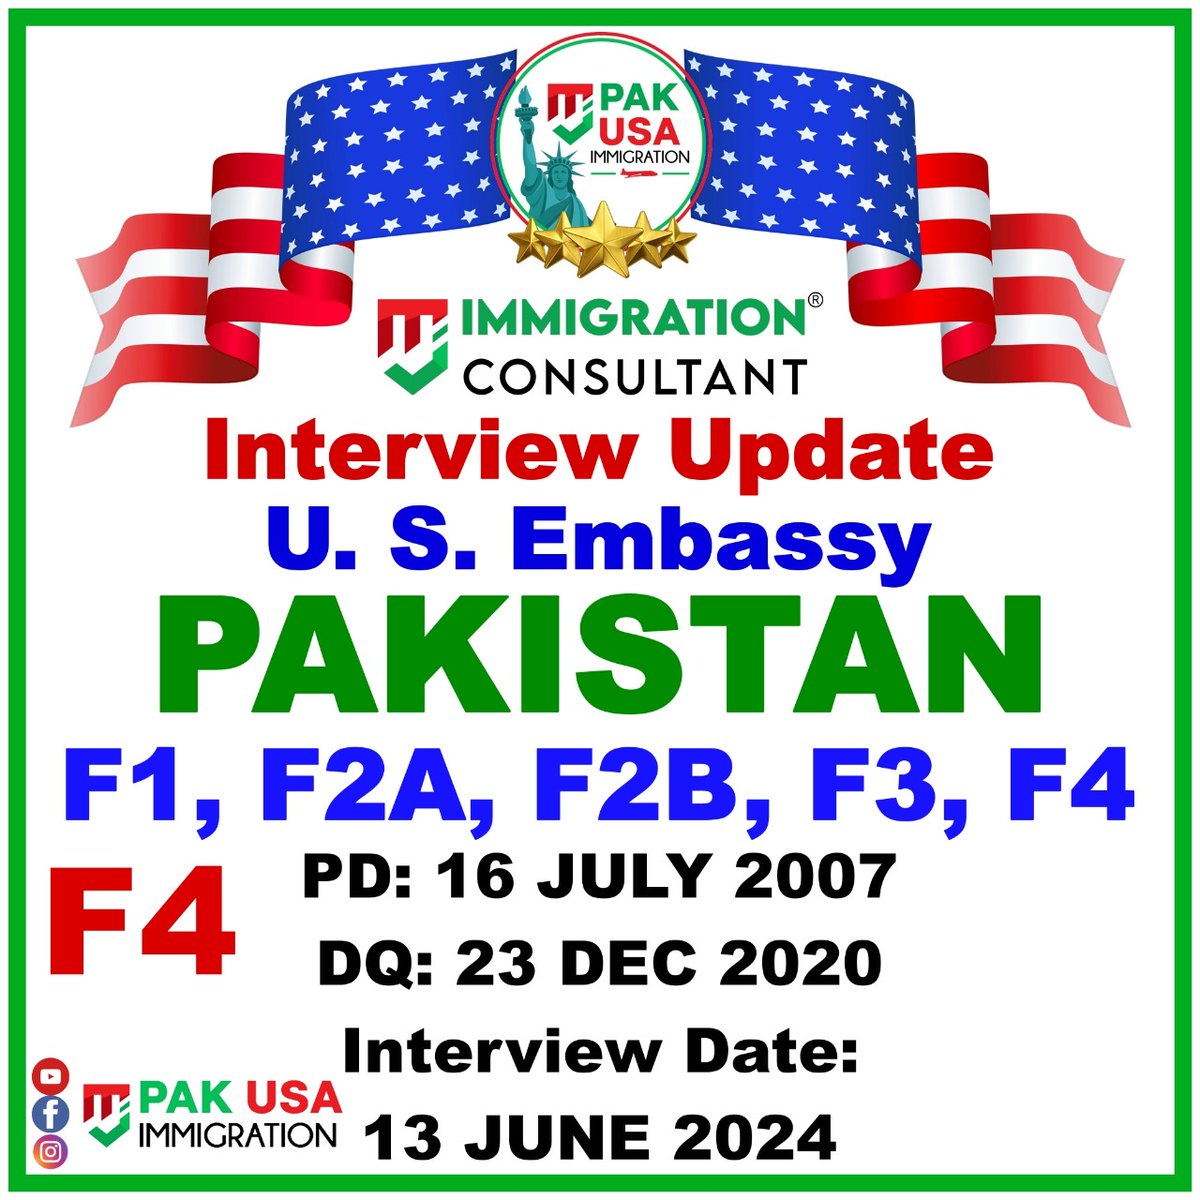 Family Visa Interview Letters Update for US Embassy in PAKISTAN
Their PD just became current in the Visa bulletin of May 2024 and that's why they got their interview letter by today.

#usimmigration #PakUSAImmigration #MJImmigrationConsultant #IR1 #PakUSImmigration #USVisa